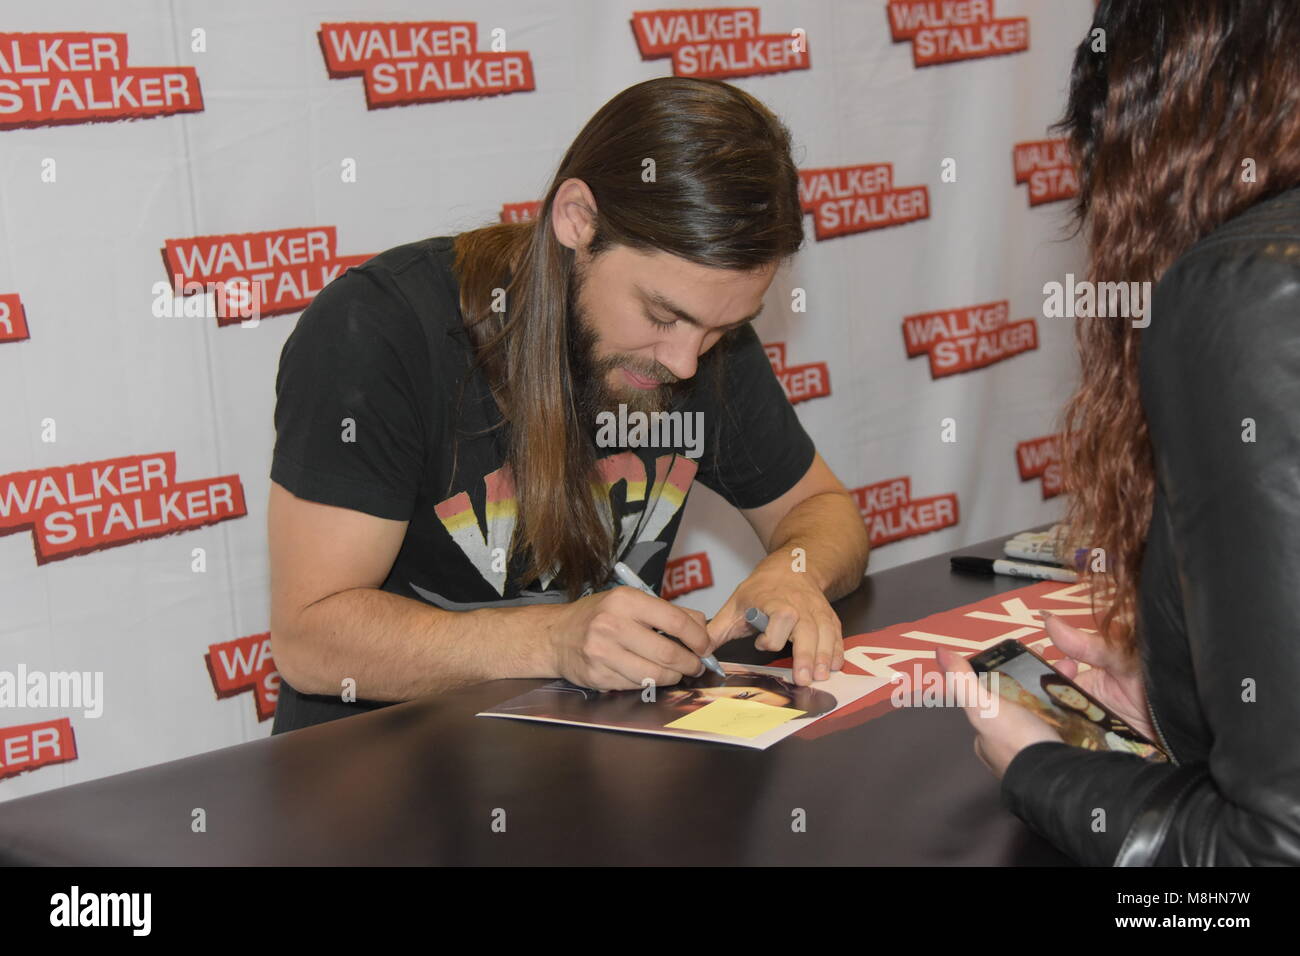 MANNHEIM, GERMANY - MARCH 17: Actor Tom Payne (Jesus on The Walking Dead) at the Walker Stalker Germany convention. (Photo by Markus Wissmann) Stock Photo